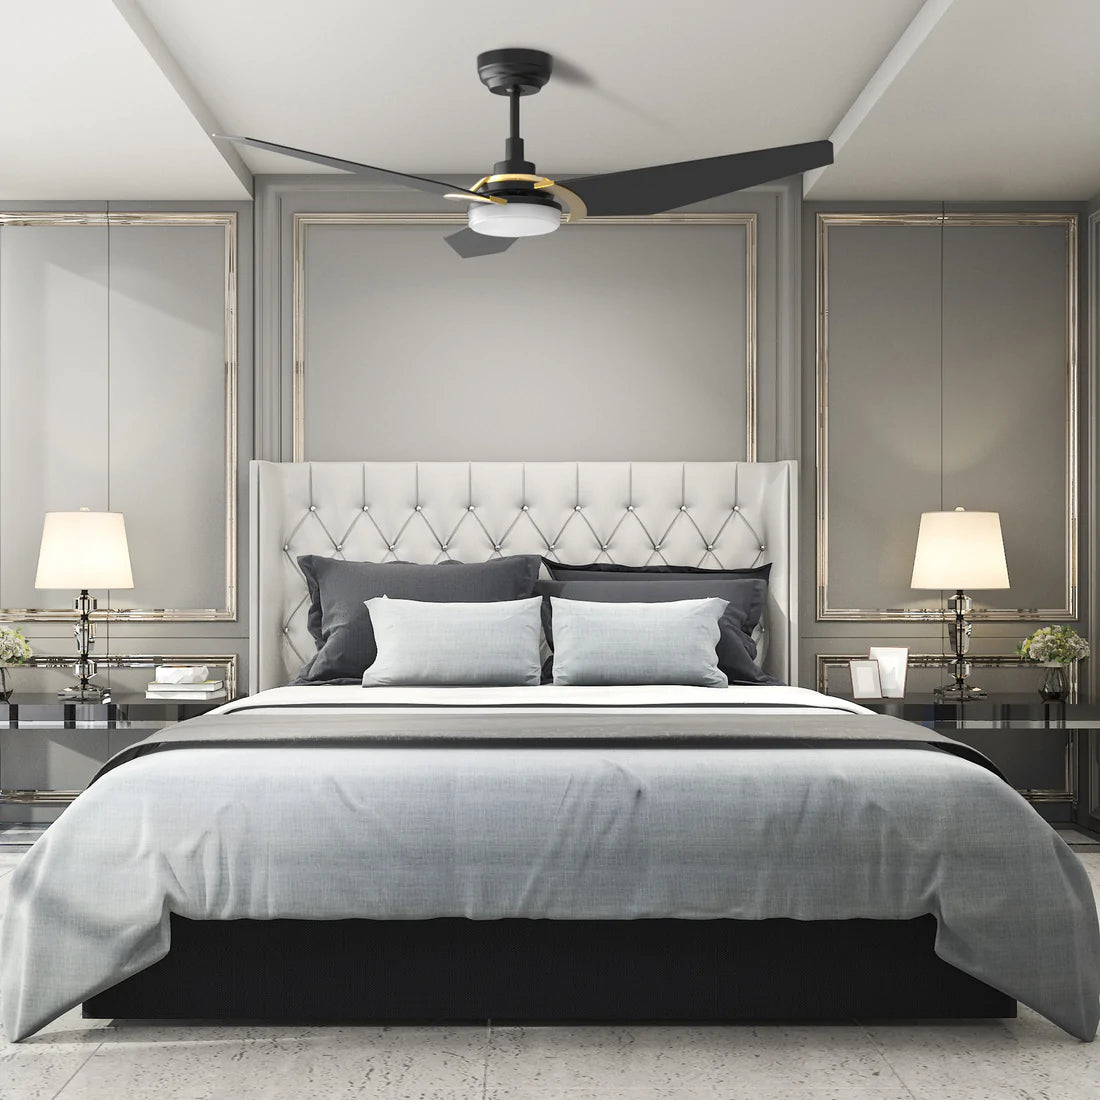 How to Choose a Ceiling Fan in Your Bedroom?